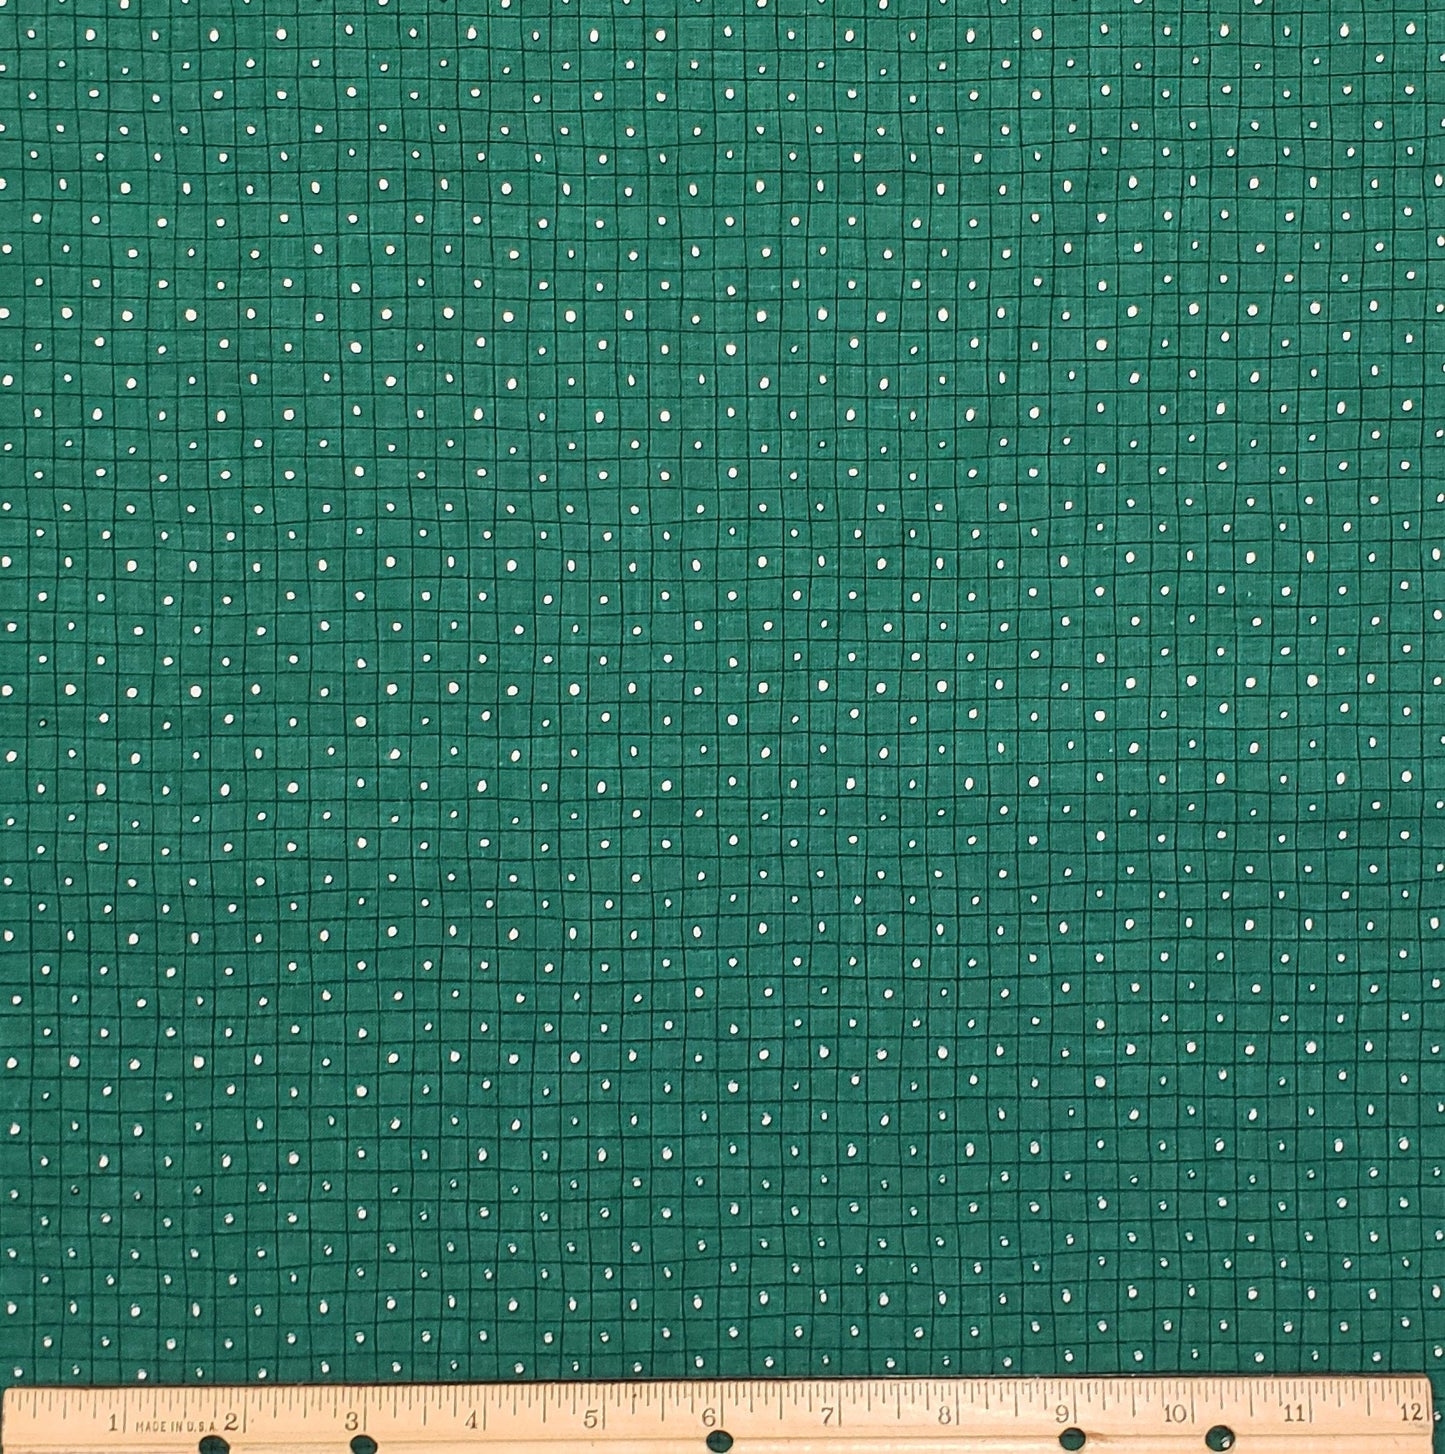 Fabric Traditions 1997 #2654 Whims Z by Mari - Dark Green Fabric / White Spots in Black Crosshatch Pattern